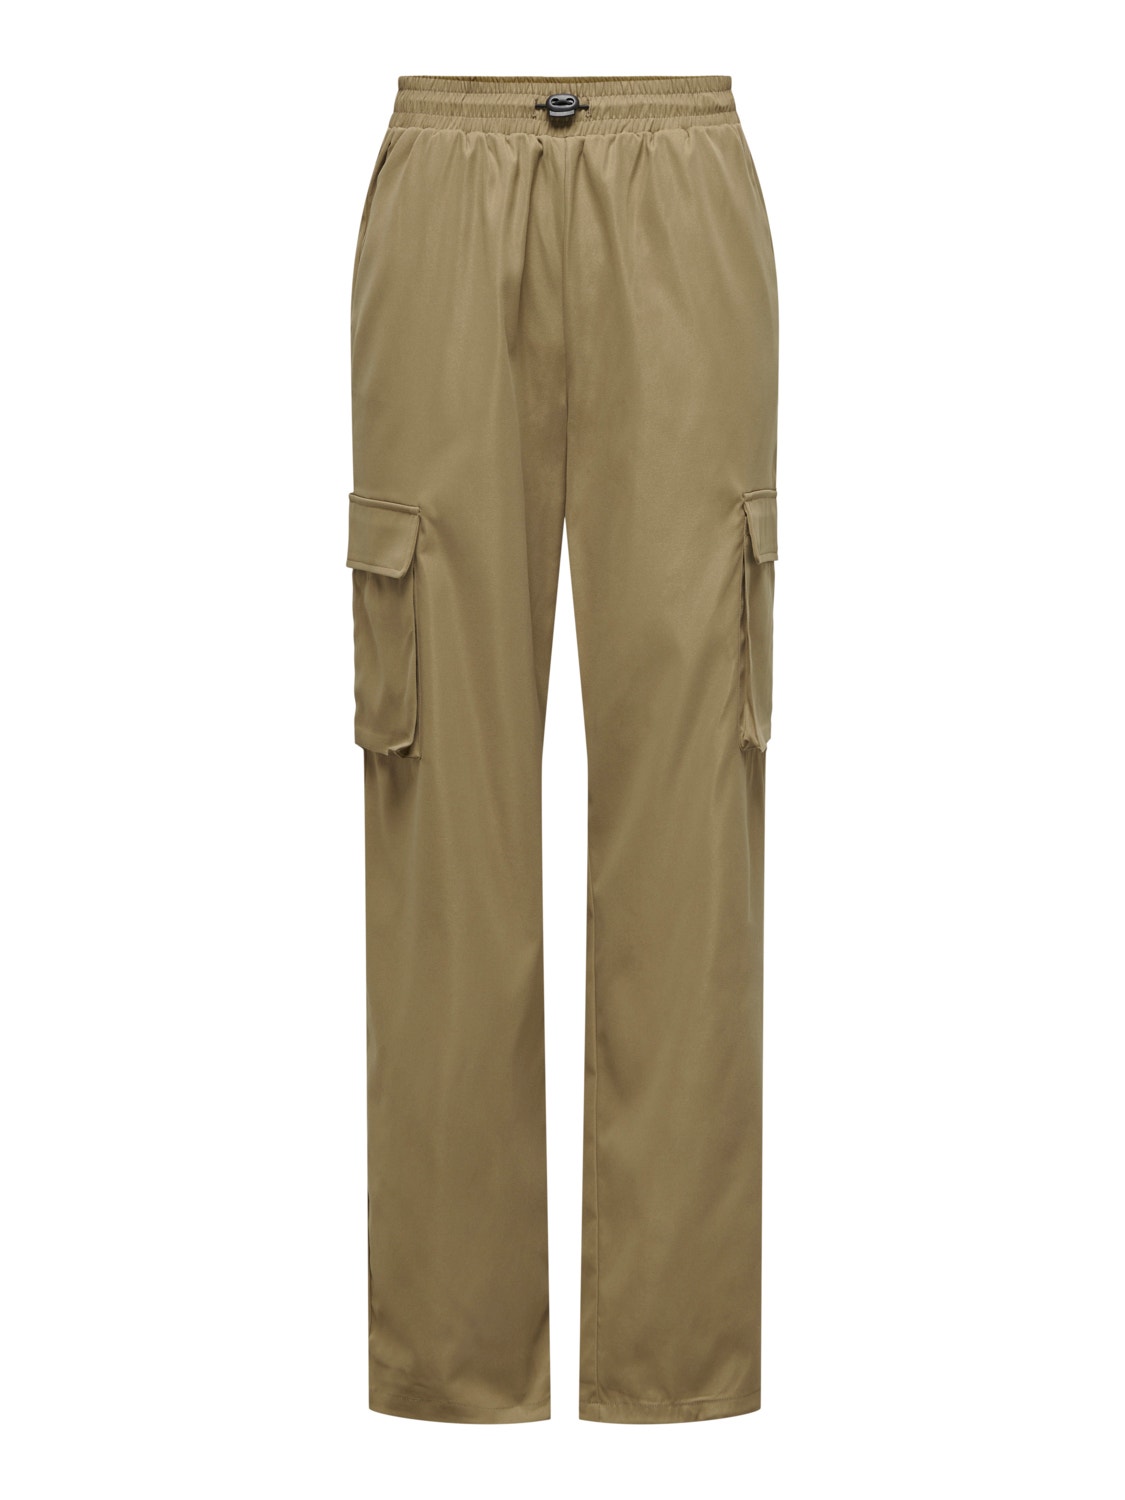 ONLY Cargo Pants With Strings -Beech - 15301004